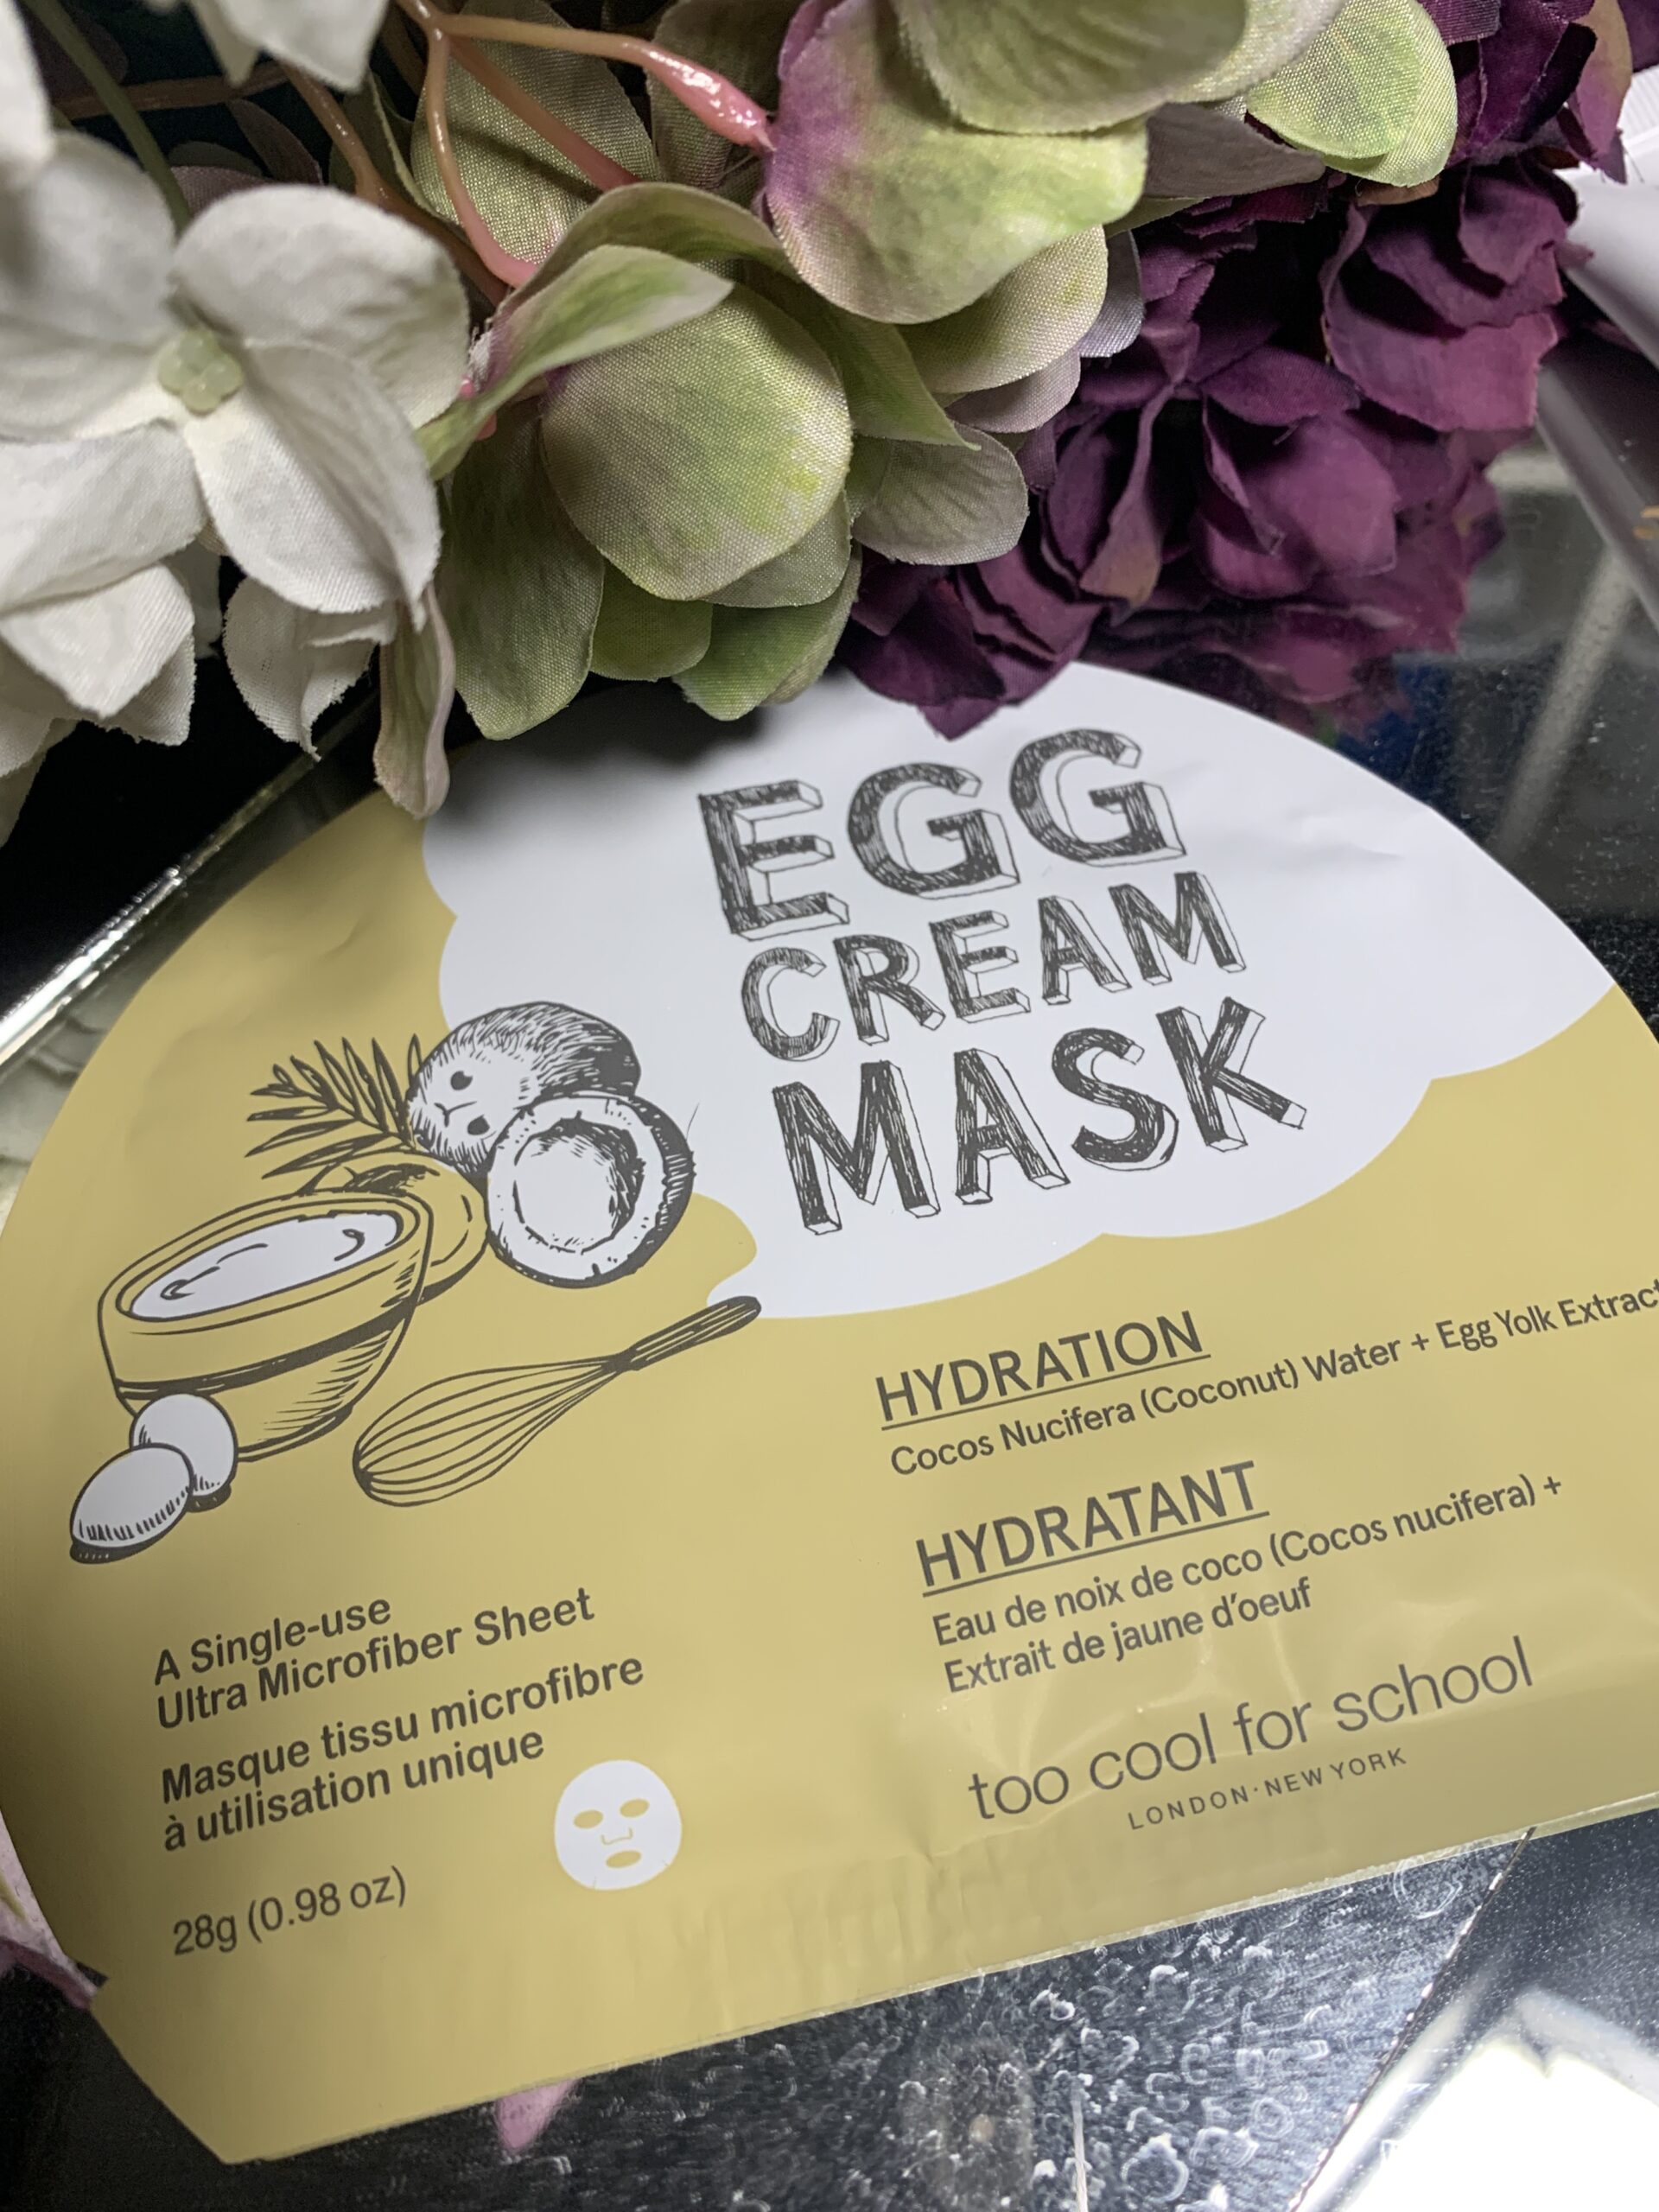 Egg Cream Mask – too cool for school